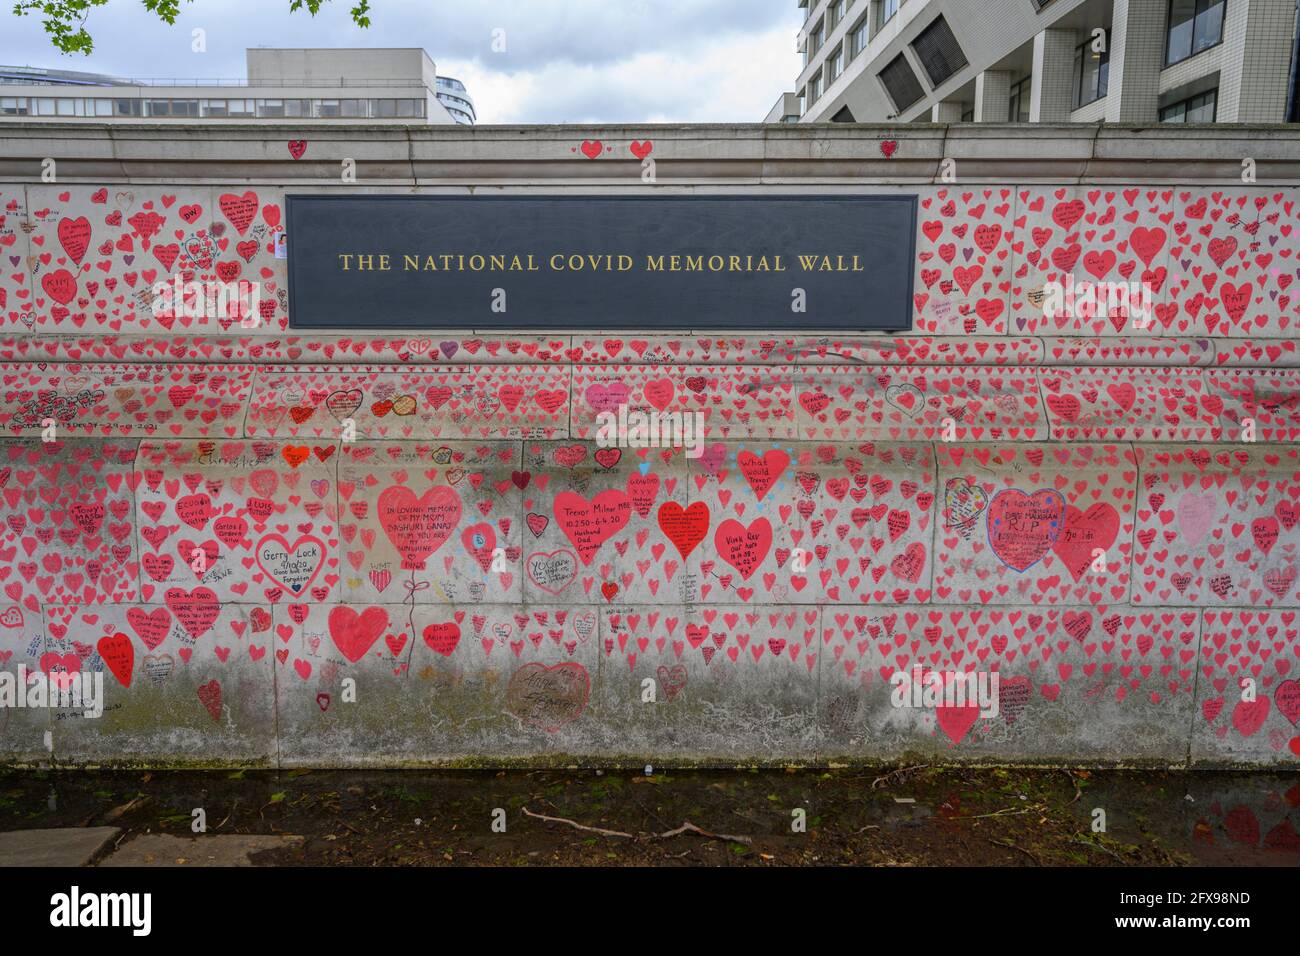 26 May 2021. The National Covid Memorial Wall on the south bank of the rover Thames, opposite the Houses of Parliament, in memory to those who lost their lives to Covid-19 in the UK. Credit: Malcolm Park/Alamy. Stock Photo